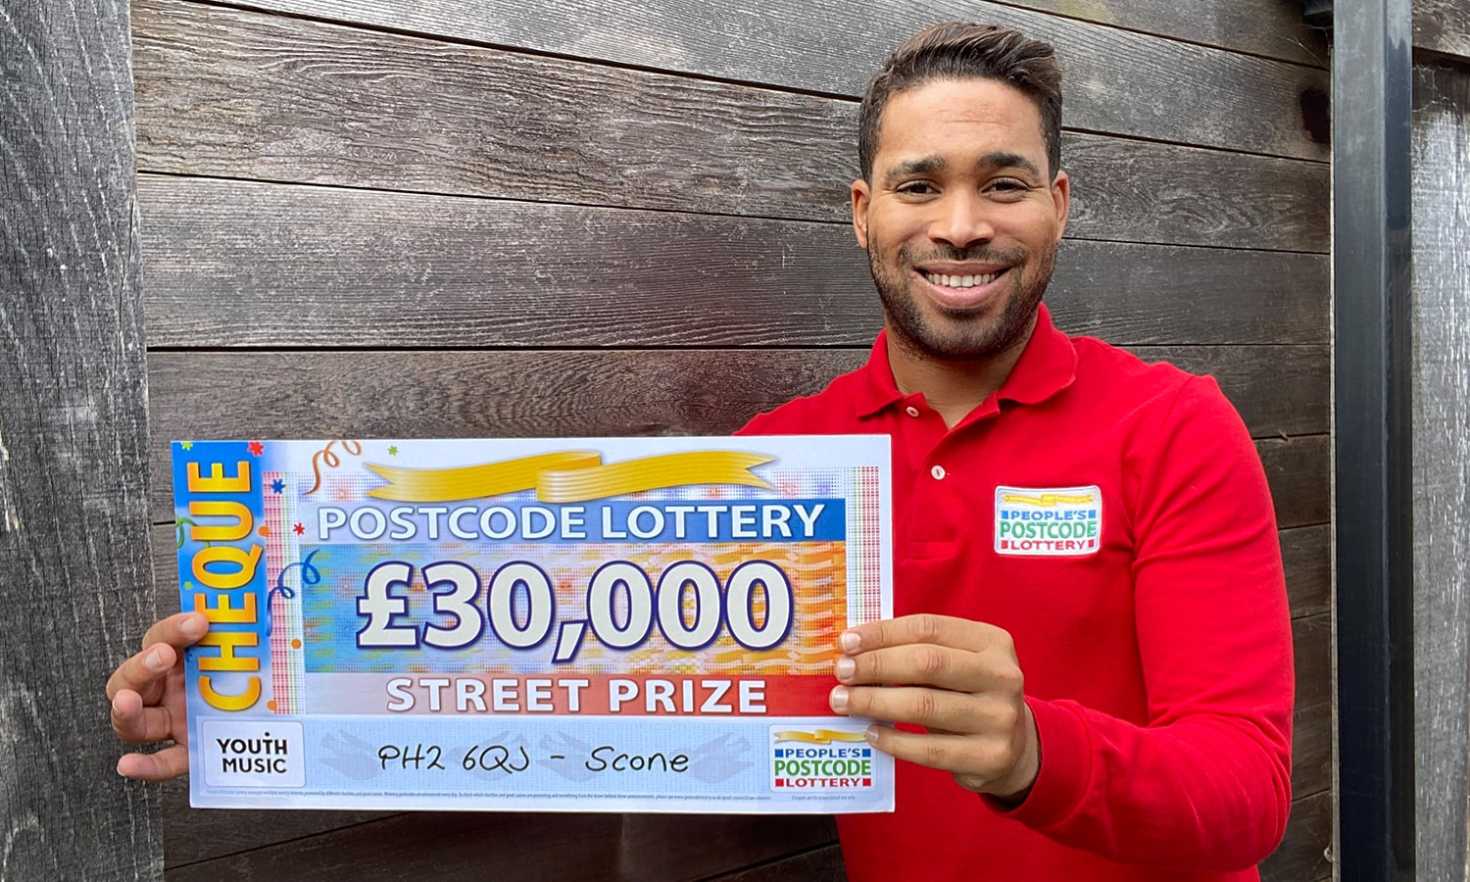 Danyl has fabulous £30,000 Street Prizes for five lucky Scone residents